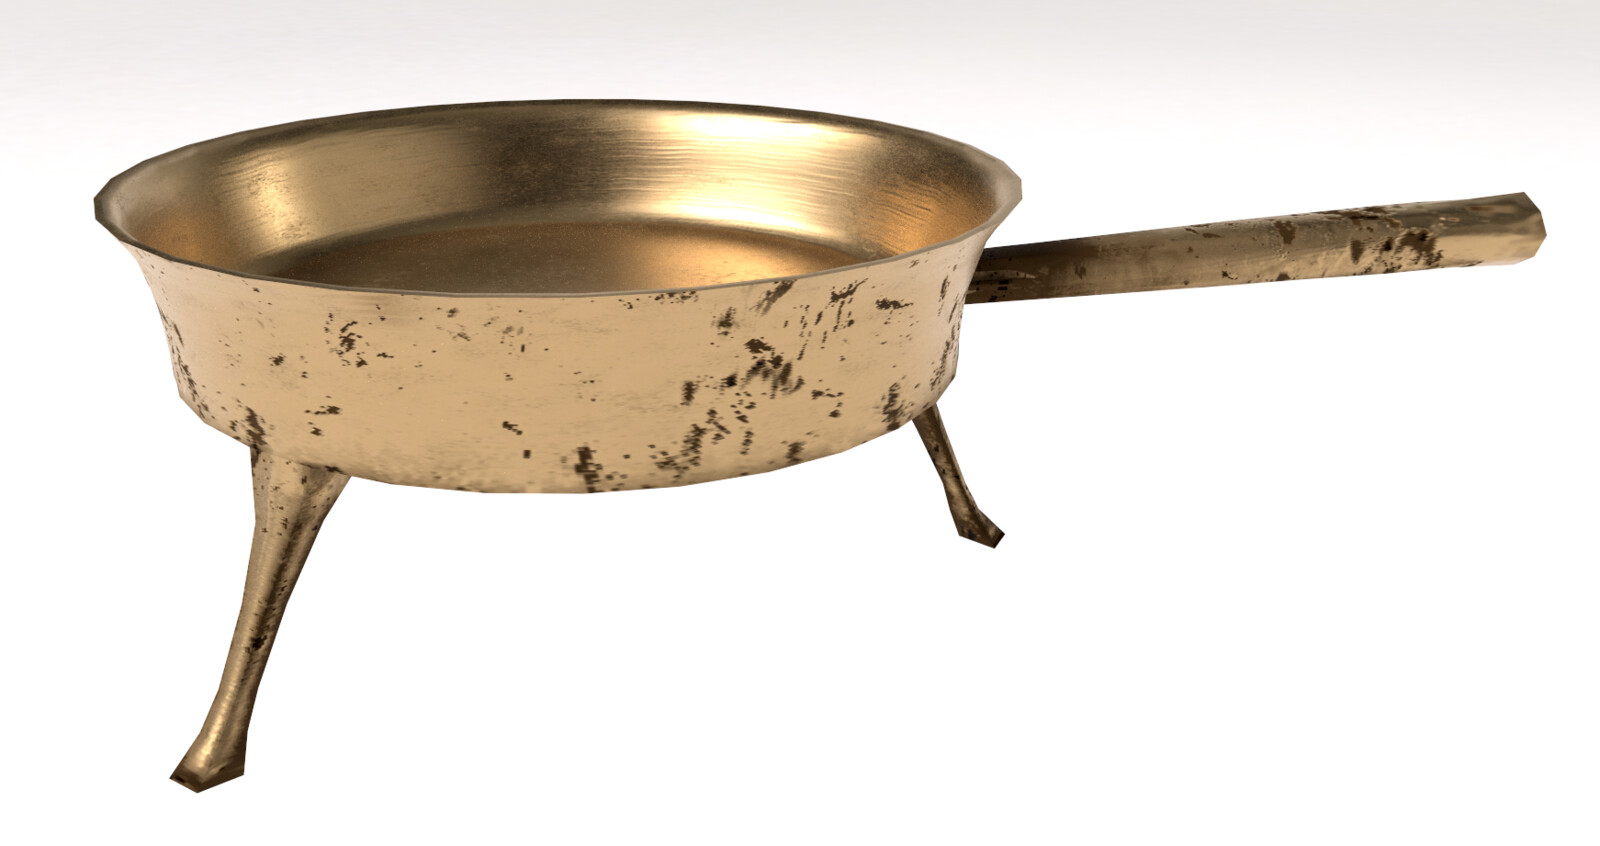 Model of a bronze skillet, 16th century, used for cooking over coals.